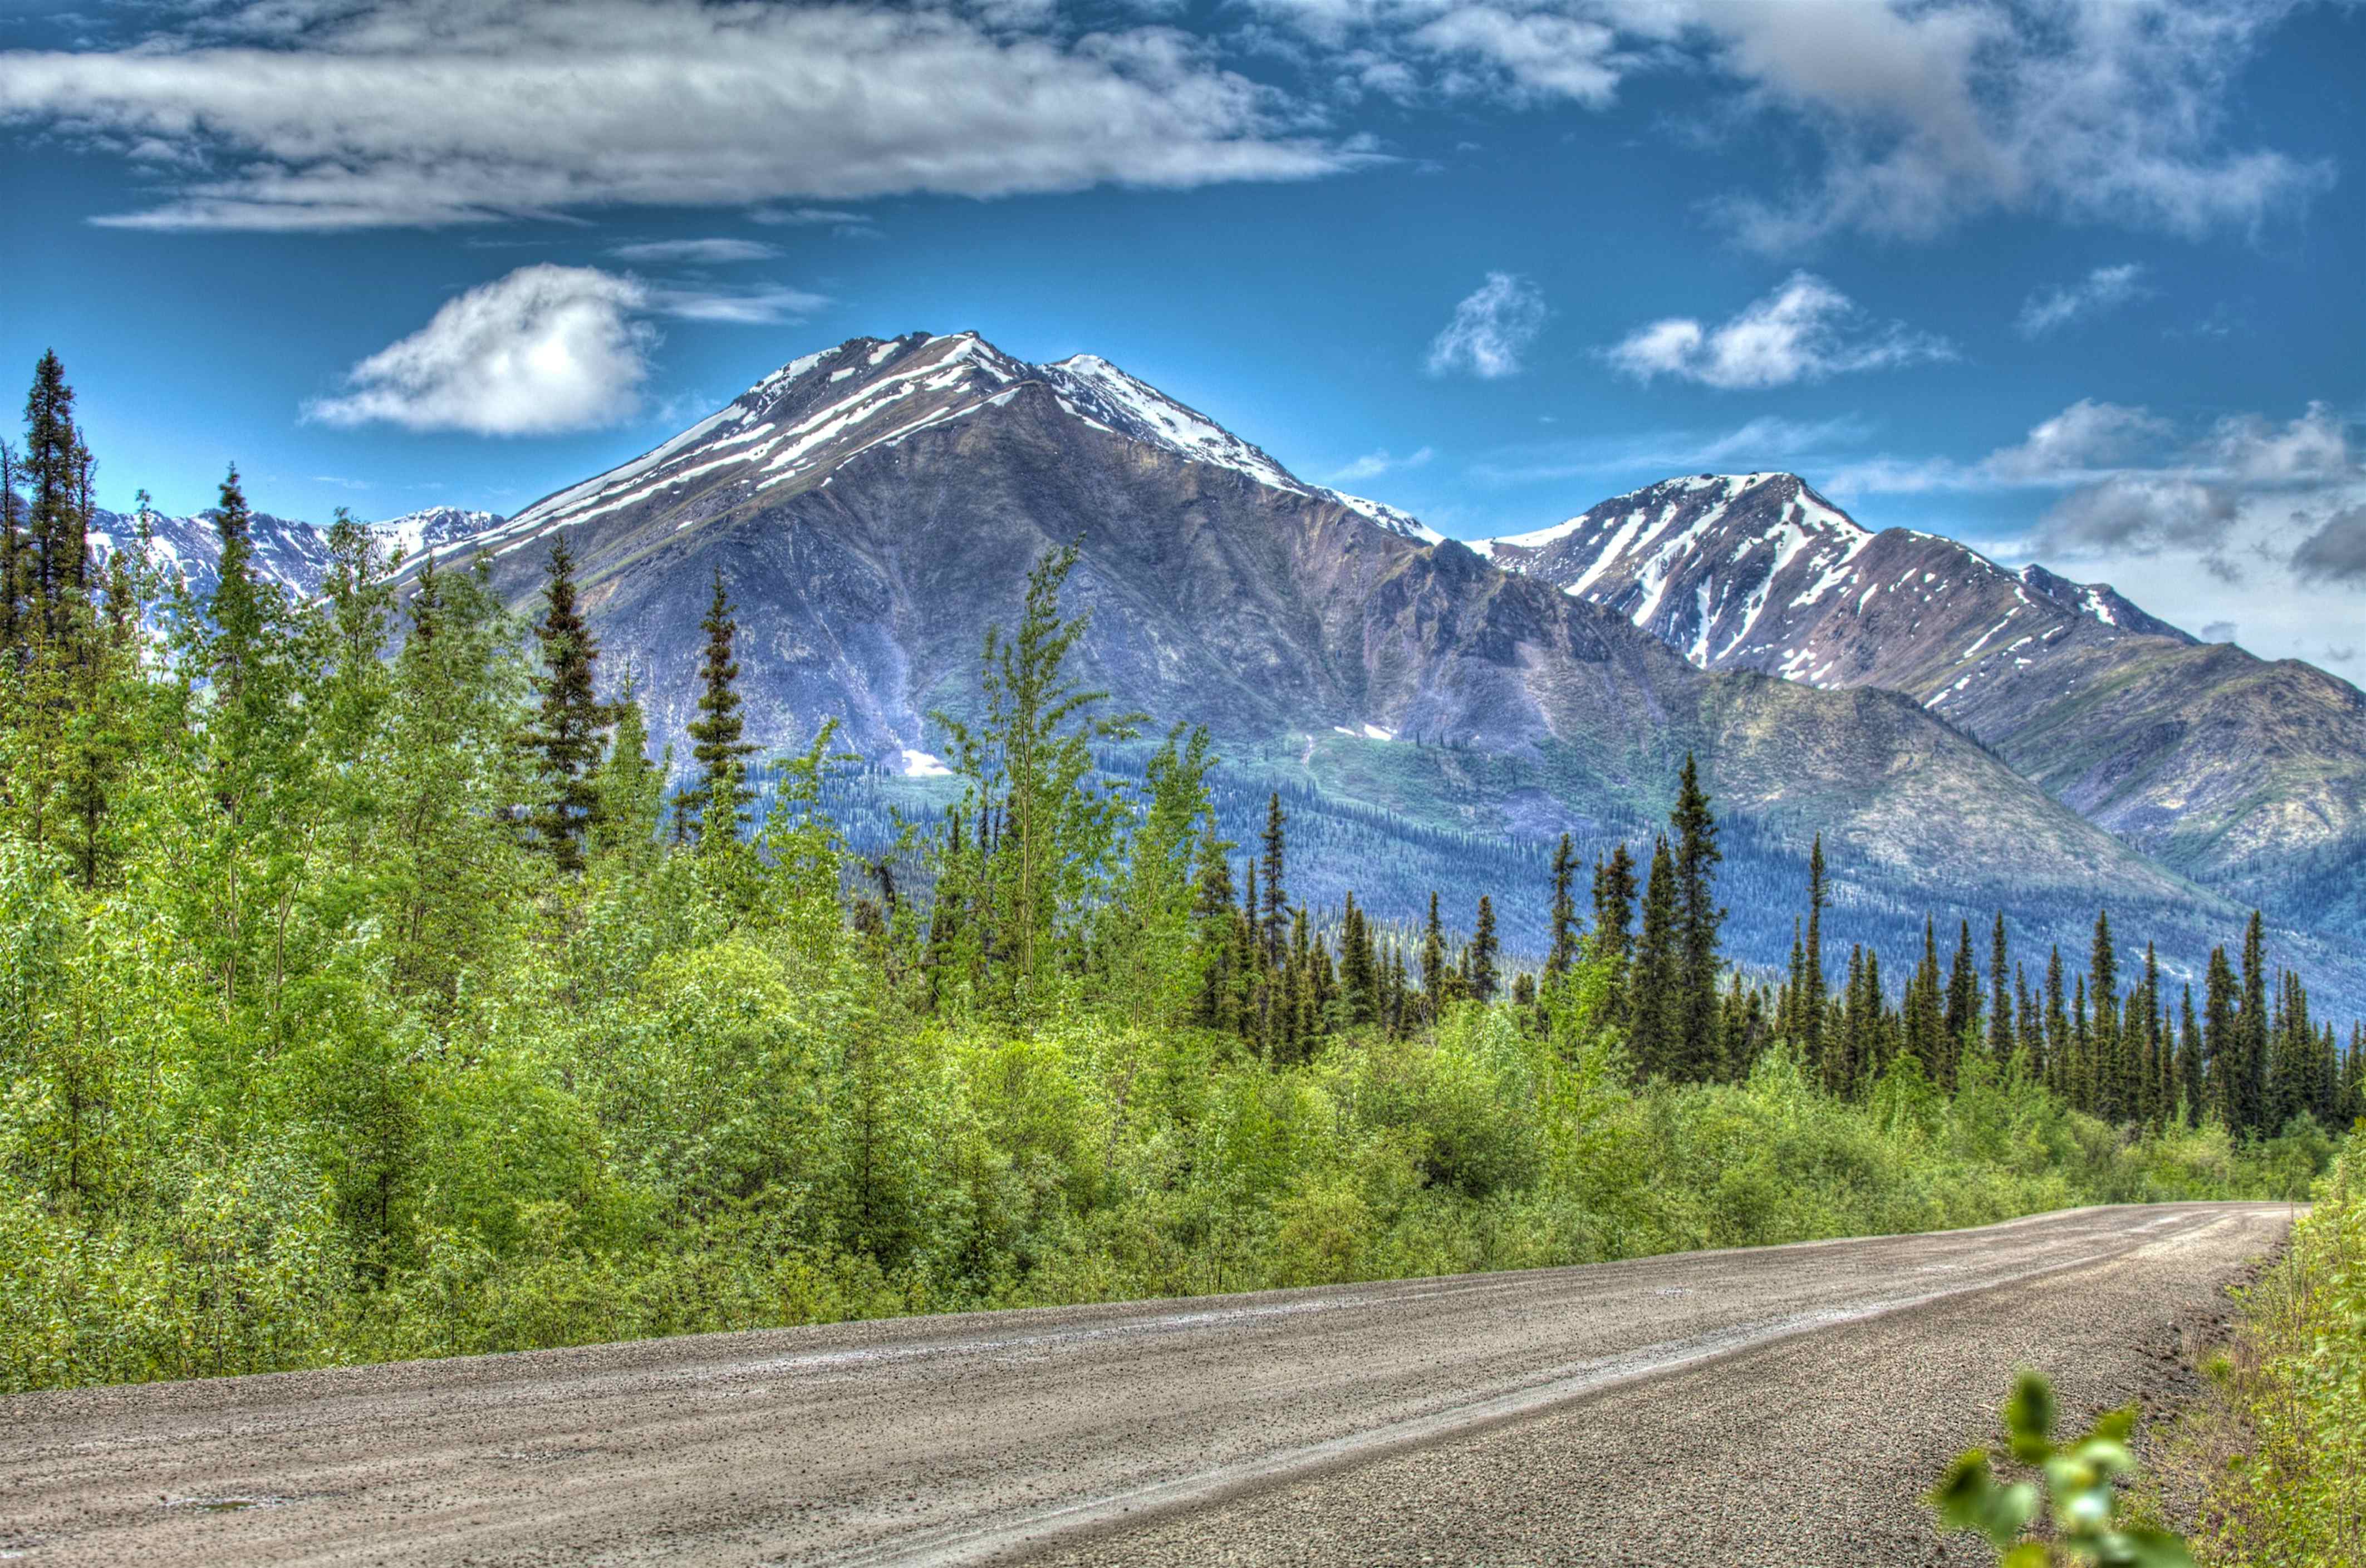 dempster highway travel guide